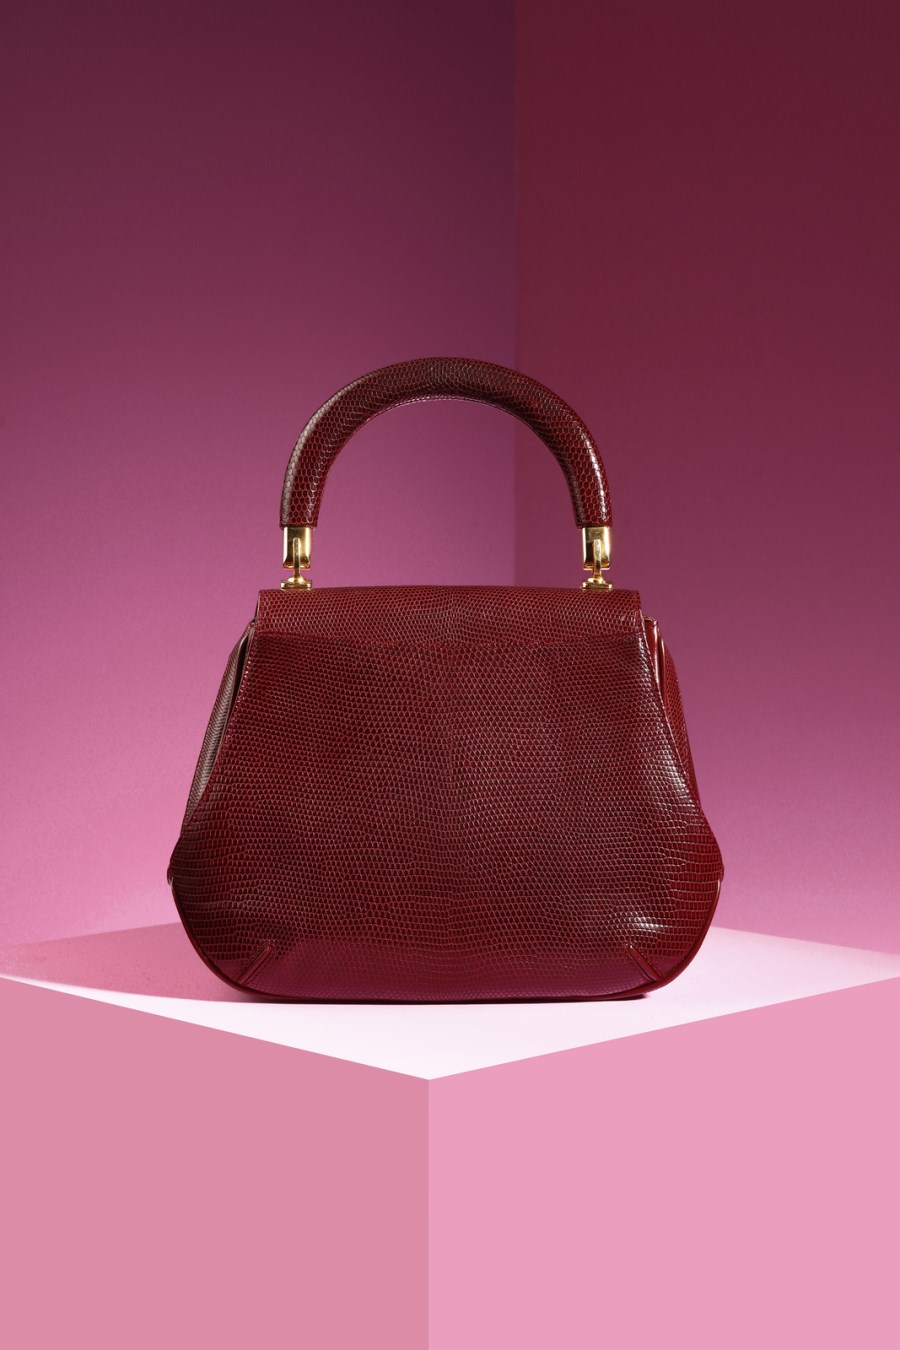 Sold at Auction: Gucci Embossed Oxblood Leather Purse